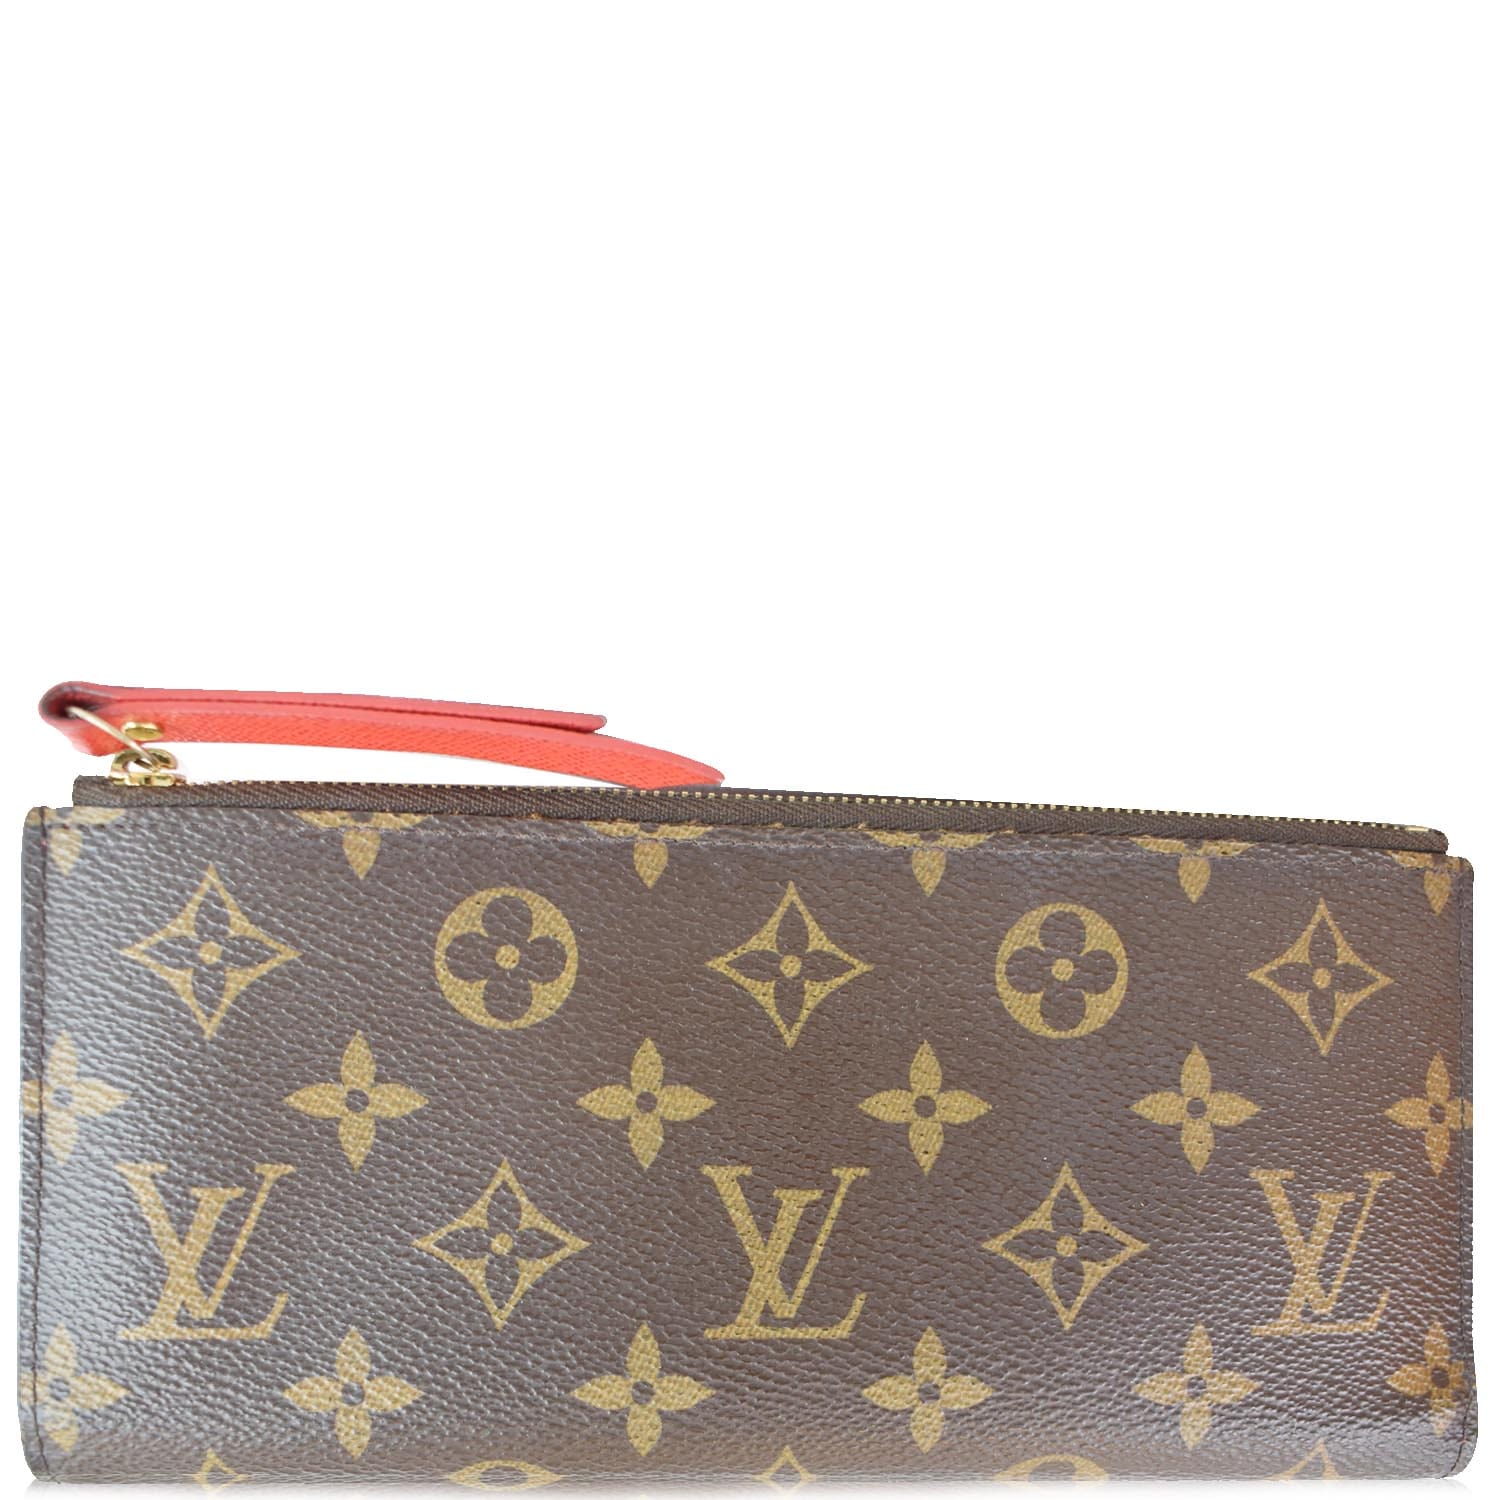 Authentic Louis Vuitton mini wallet Adele and cardholder